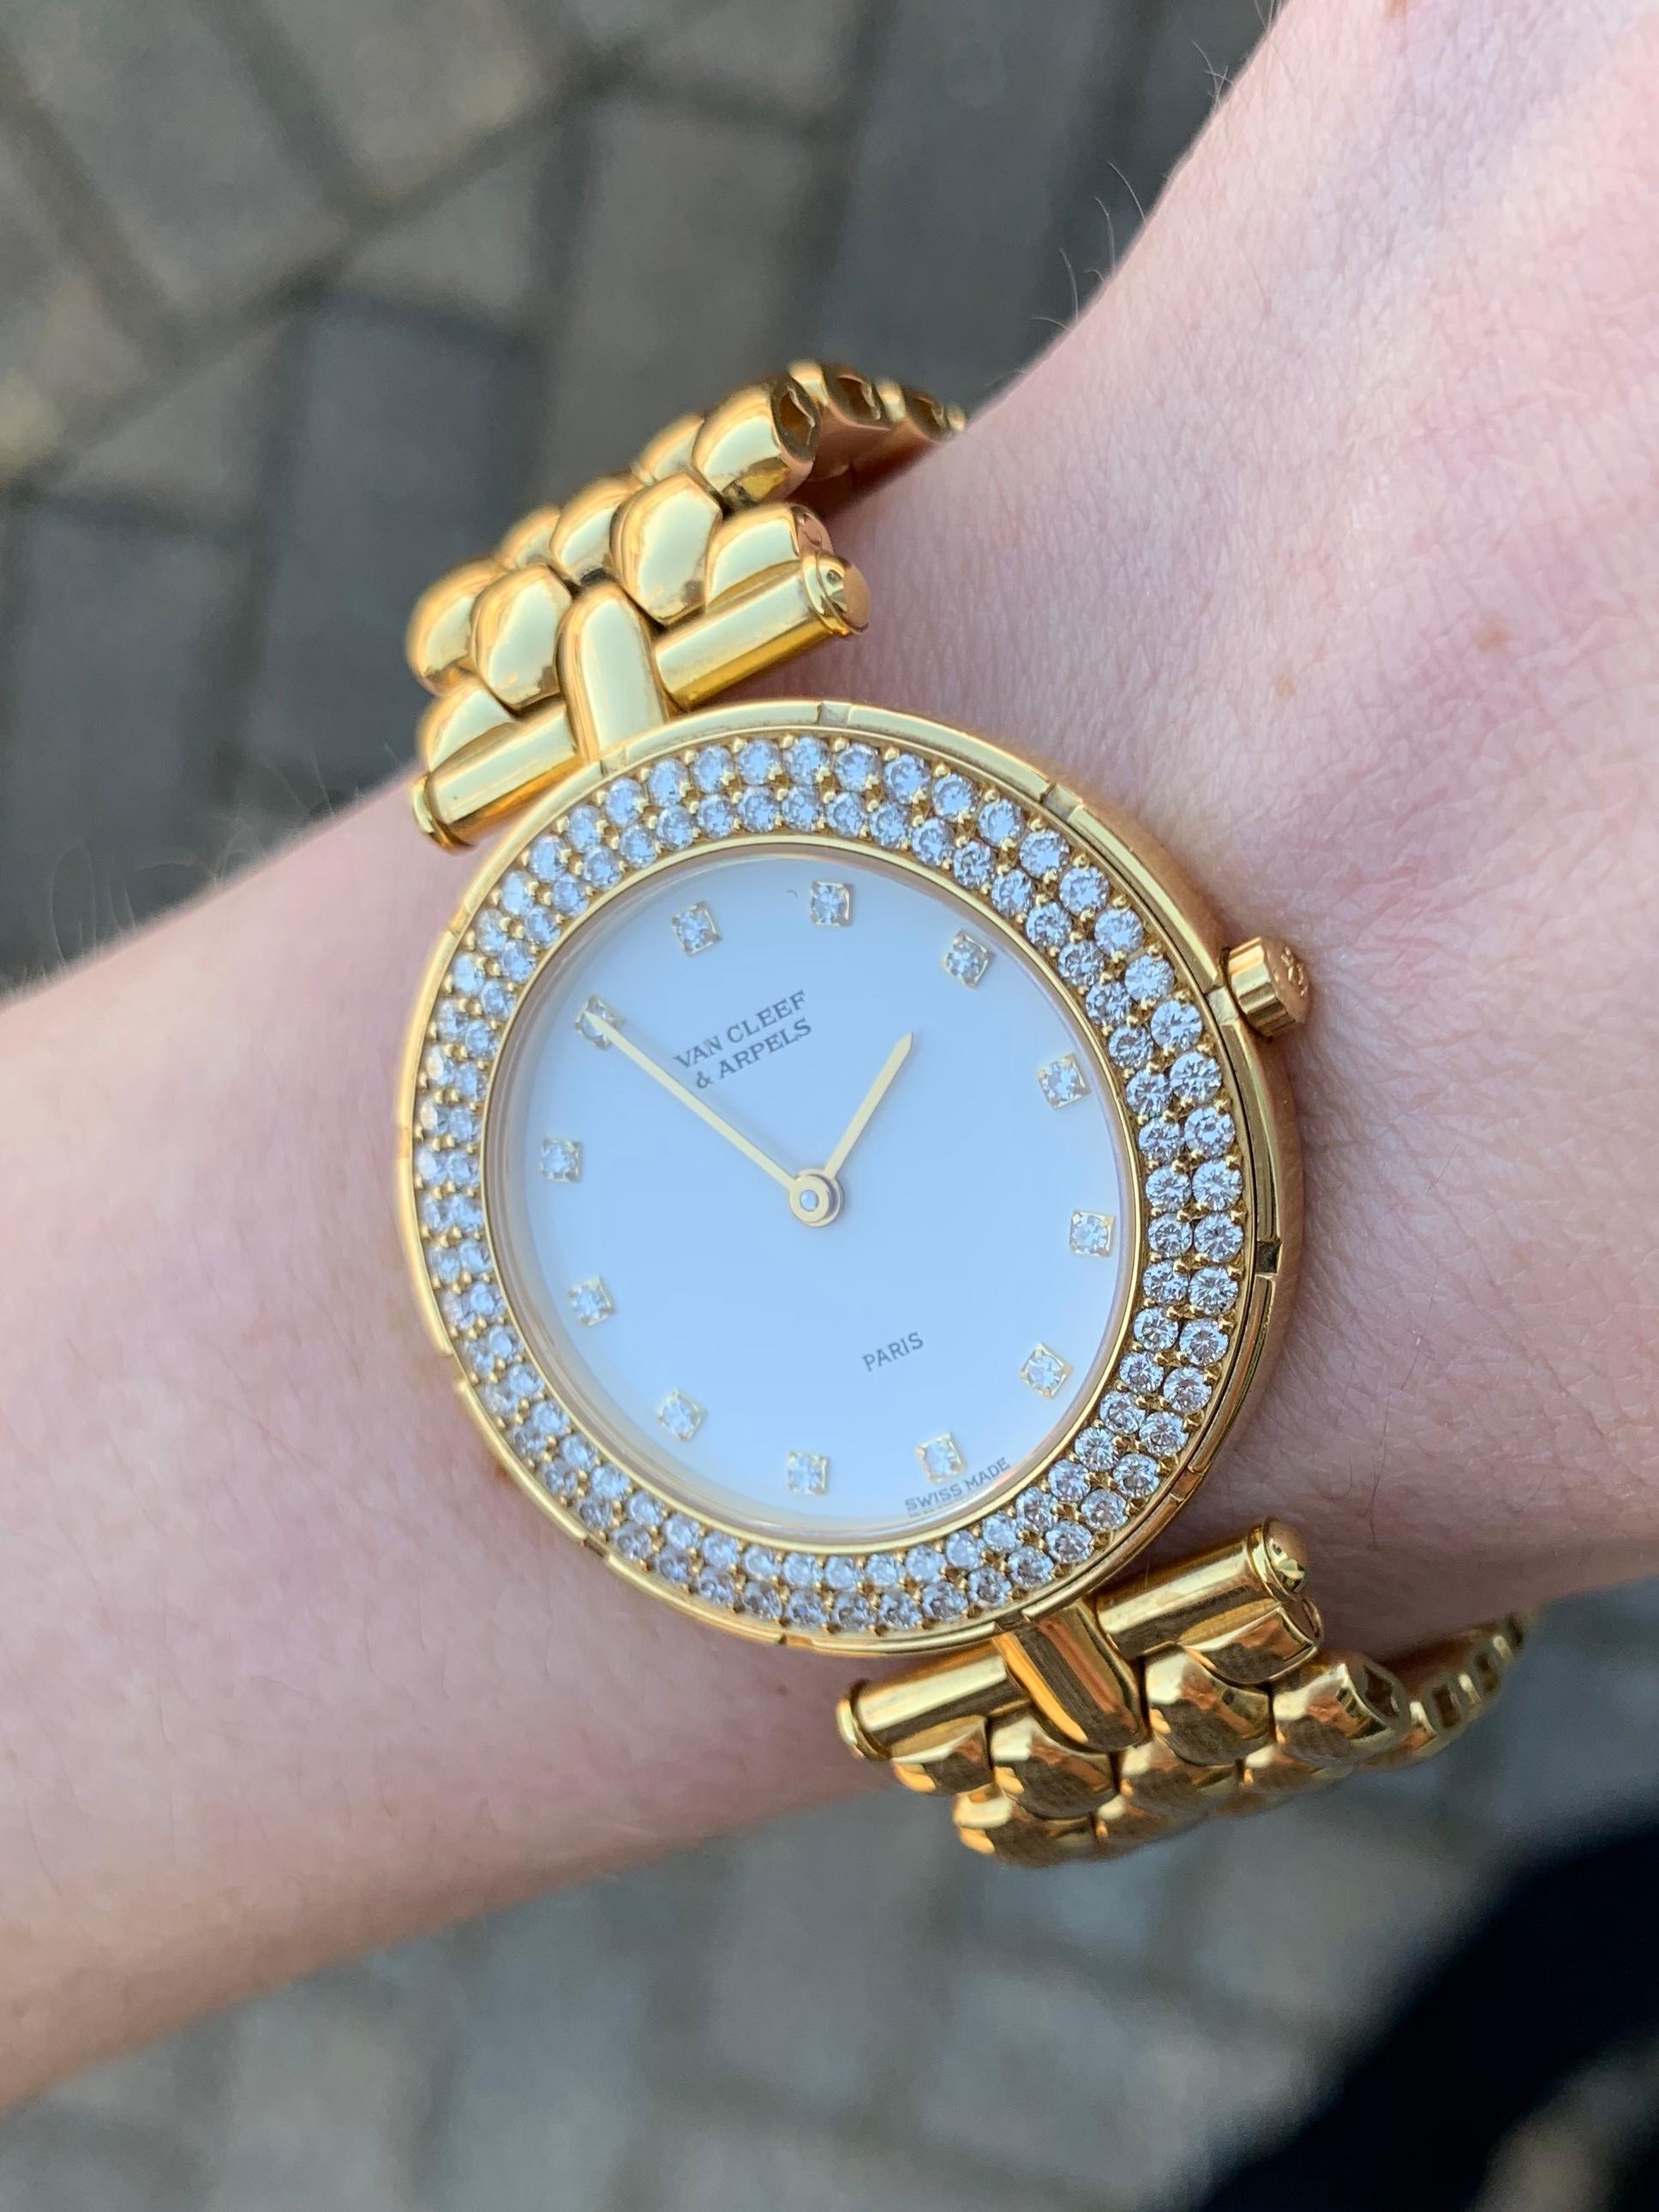 A sophisticated polished 18k yellow gold Van Cleef and Arpels round diamond 'Classique' watch featuring two rows of perfectly pave set diamonds and an ivory dial with diamond hour marks. Approximate diamond total weight is 1.45 carats. Case measures